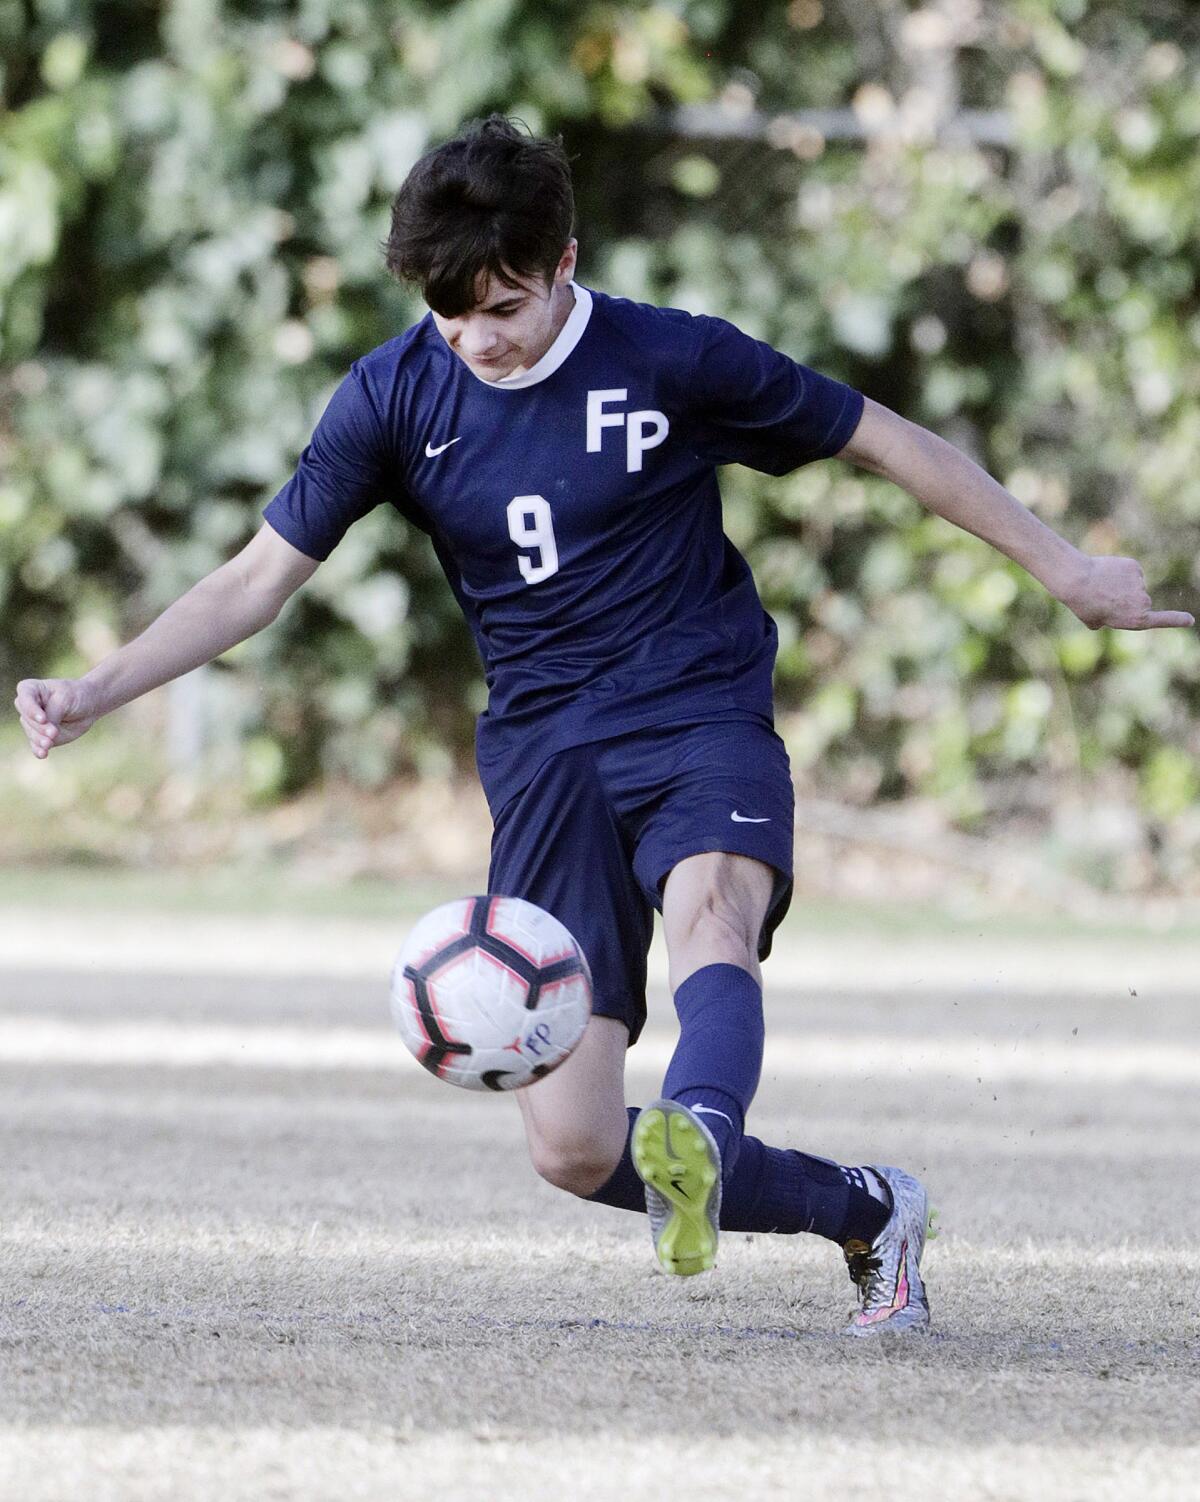 Flintridge Prep's Andrew Odom shoots on the Providence goal in a Prep League boys' soccer game at Flintridge Preparatory School in La Canada Flintridge on Wednesday, January 29, 2020. Providence won the game 1-0 after scoring in the first half.